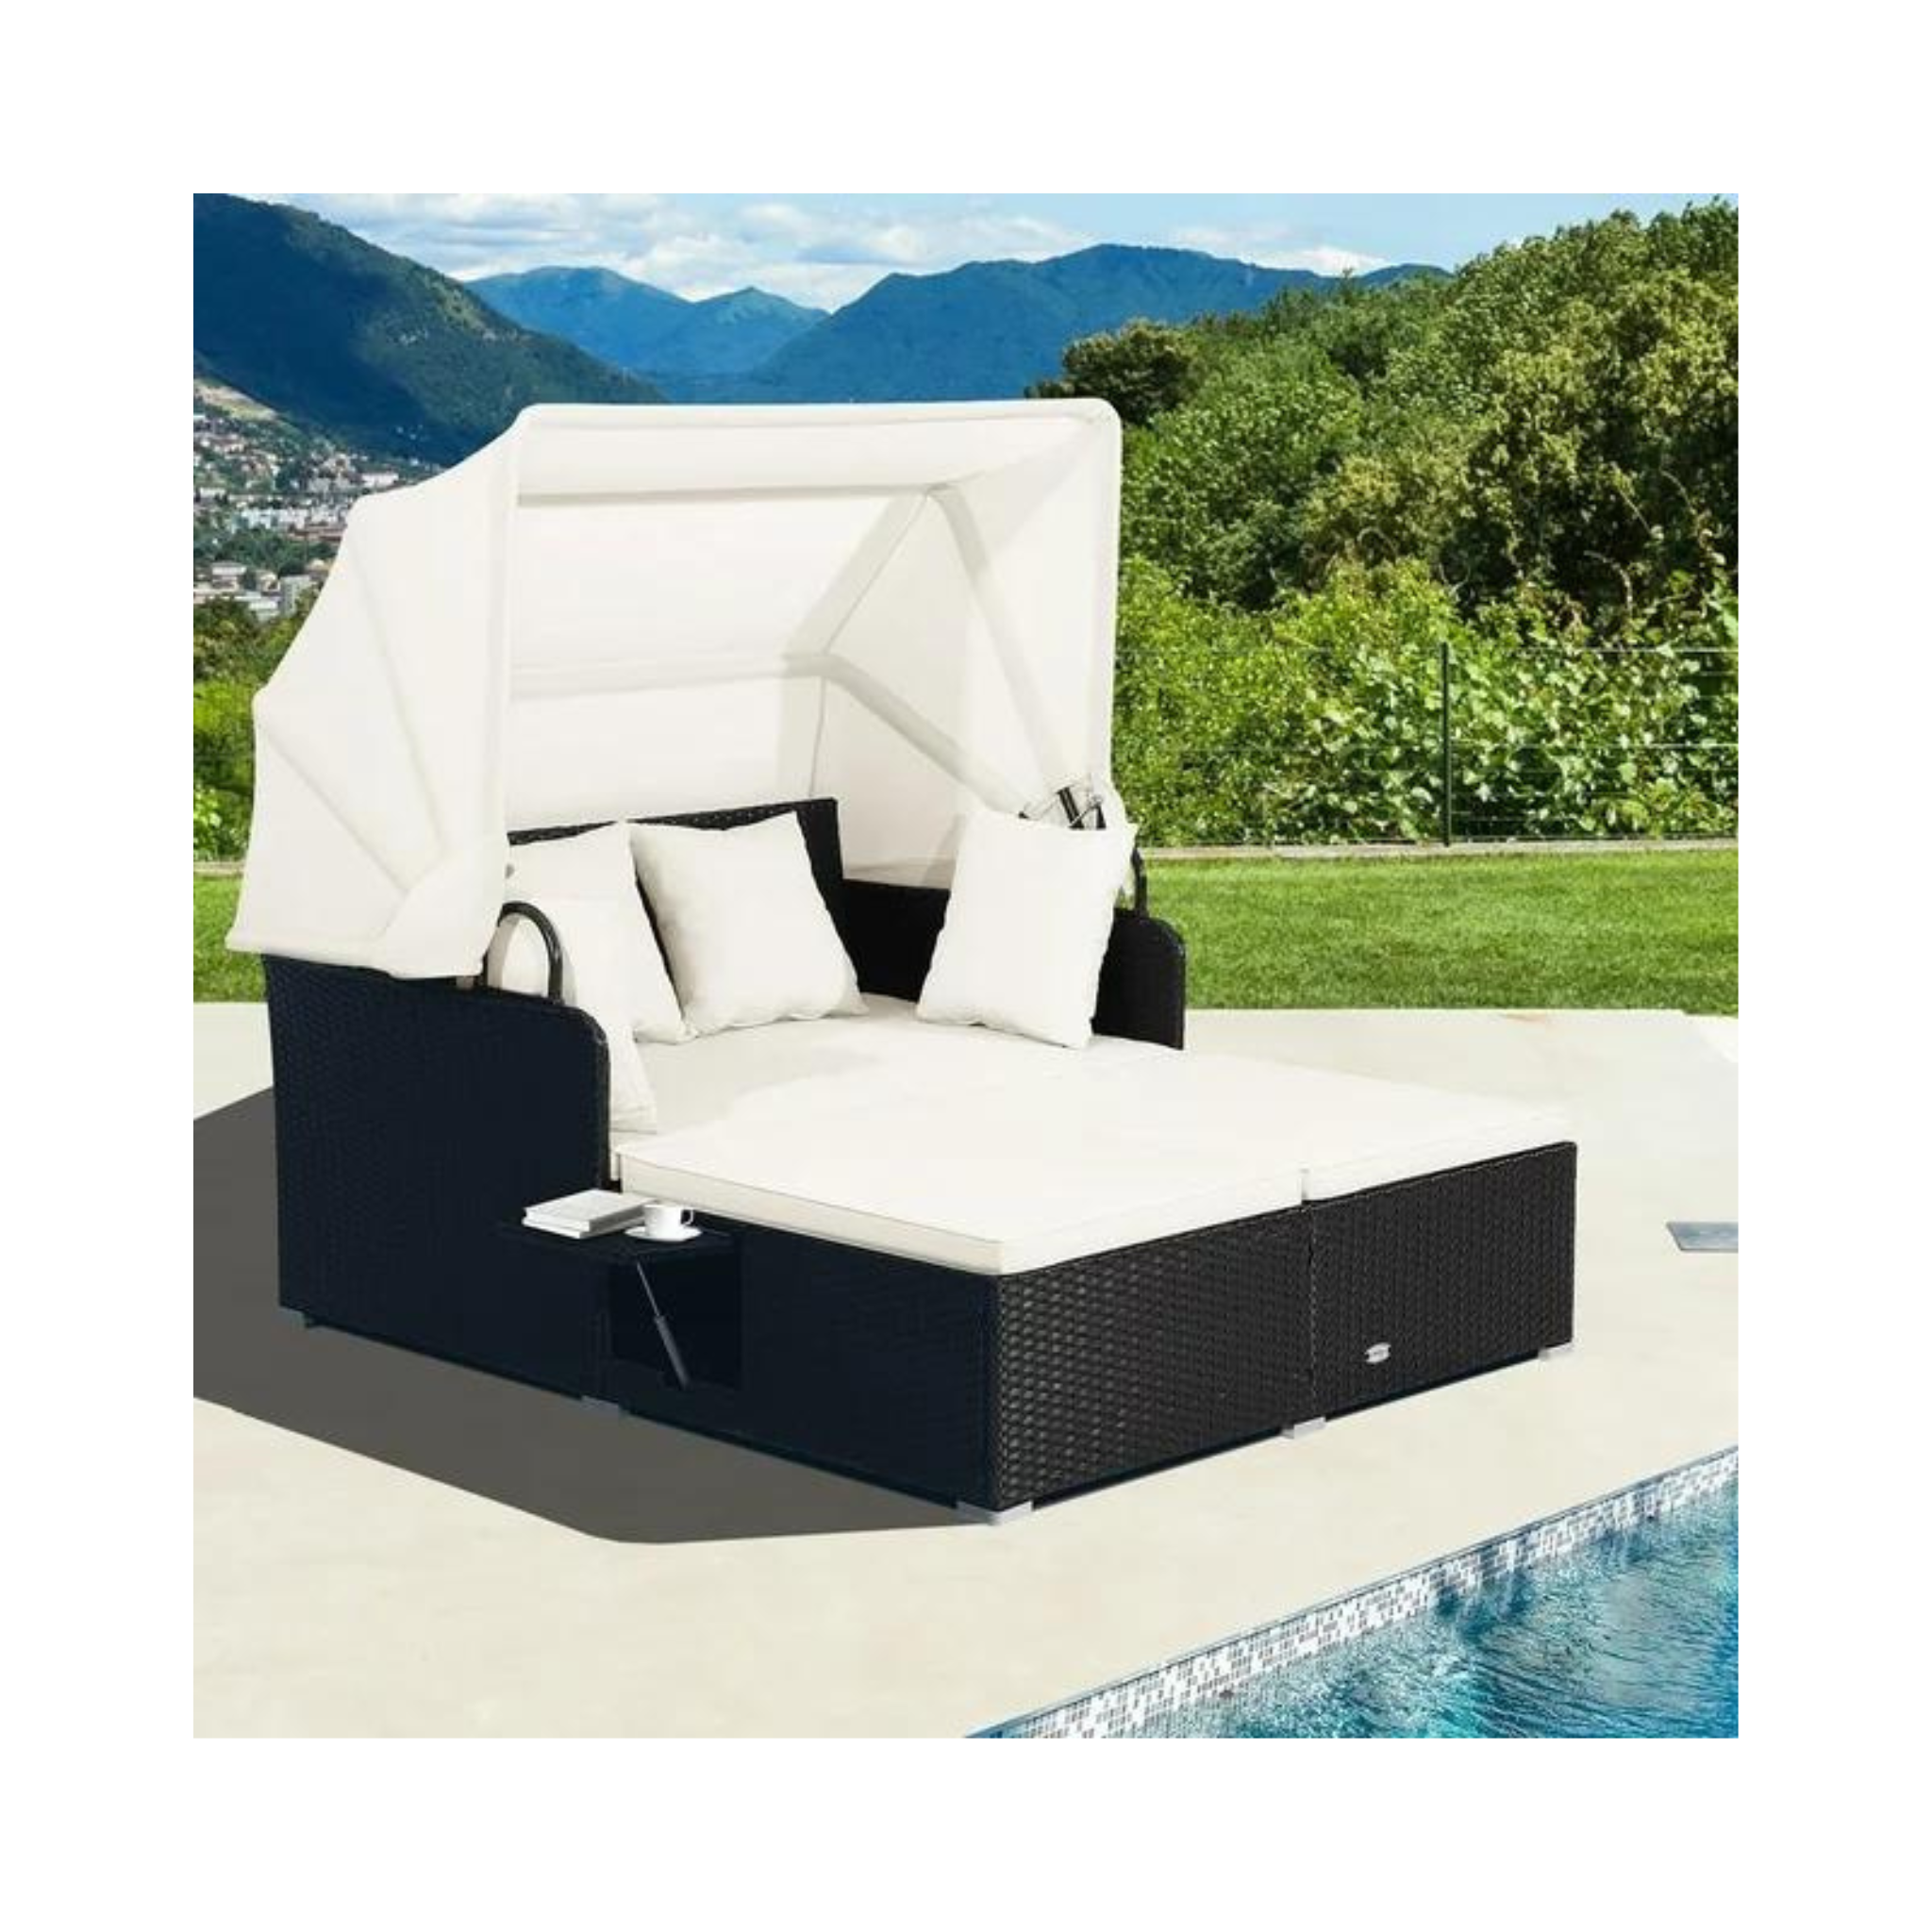 Patio Daybed Lounge w/ Retractable Top Canopy, Side Tables, Cushions